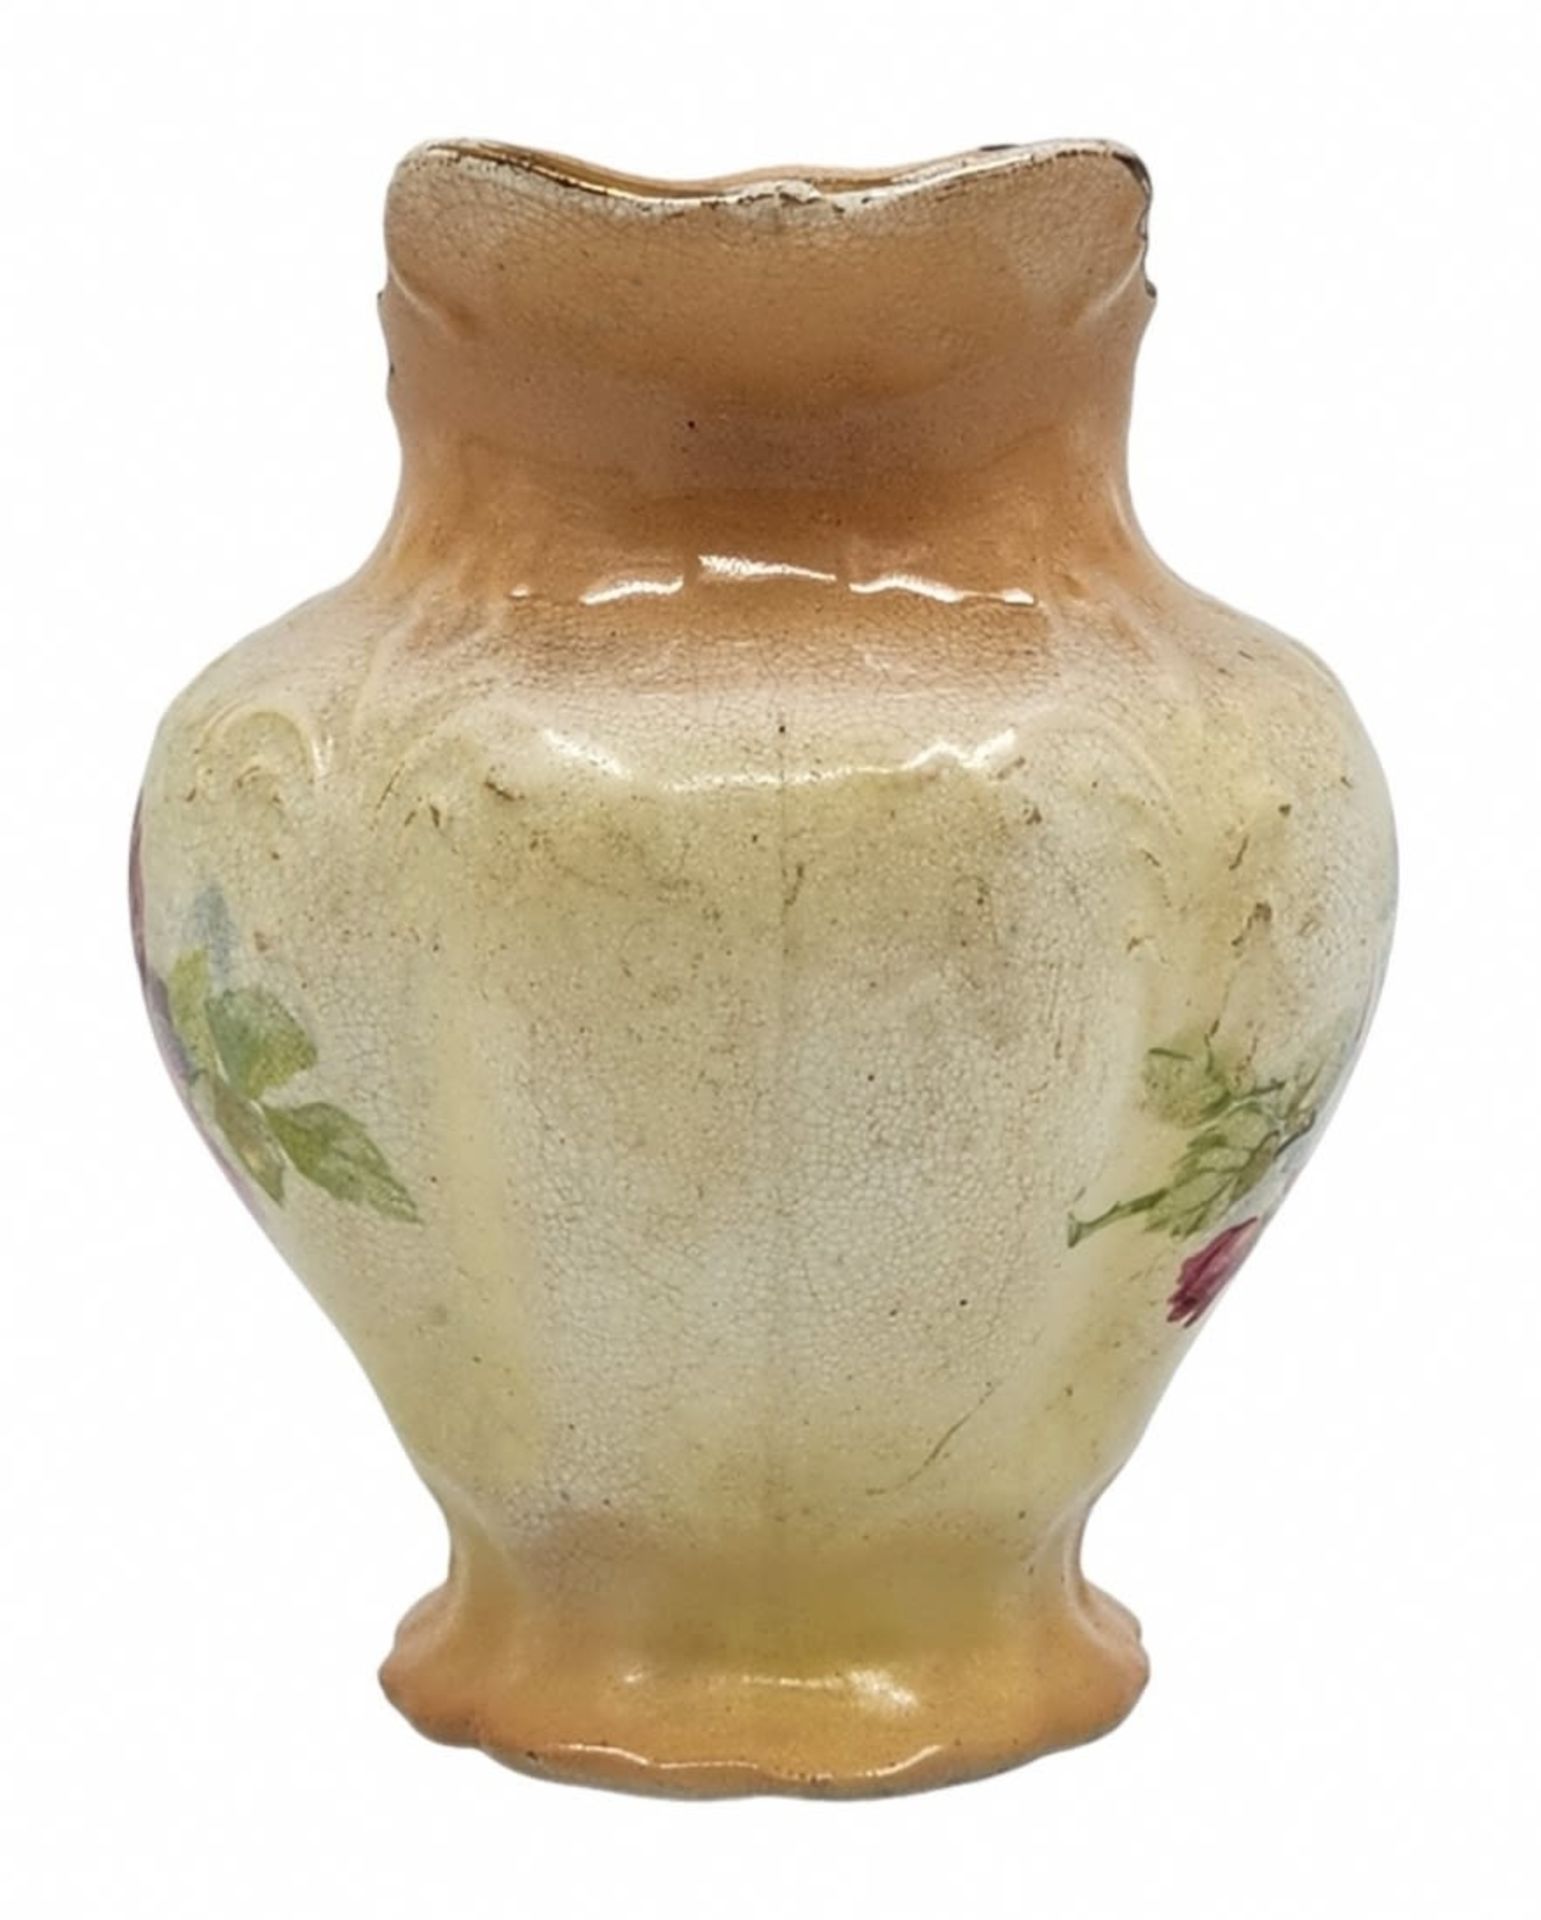 Antique Victorian English vase, made of pottery decorated with a print of blooming roses on a - Image 3 of 3